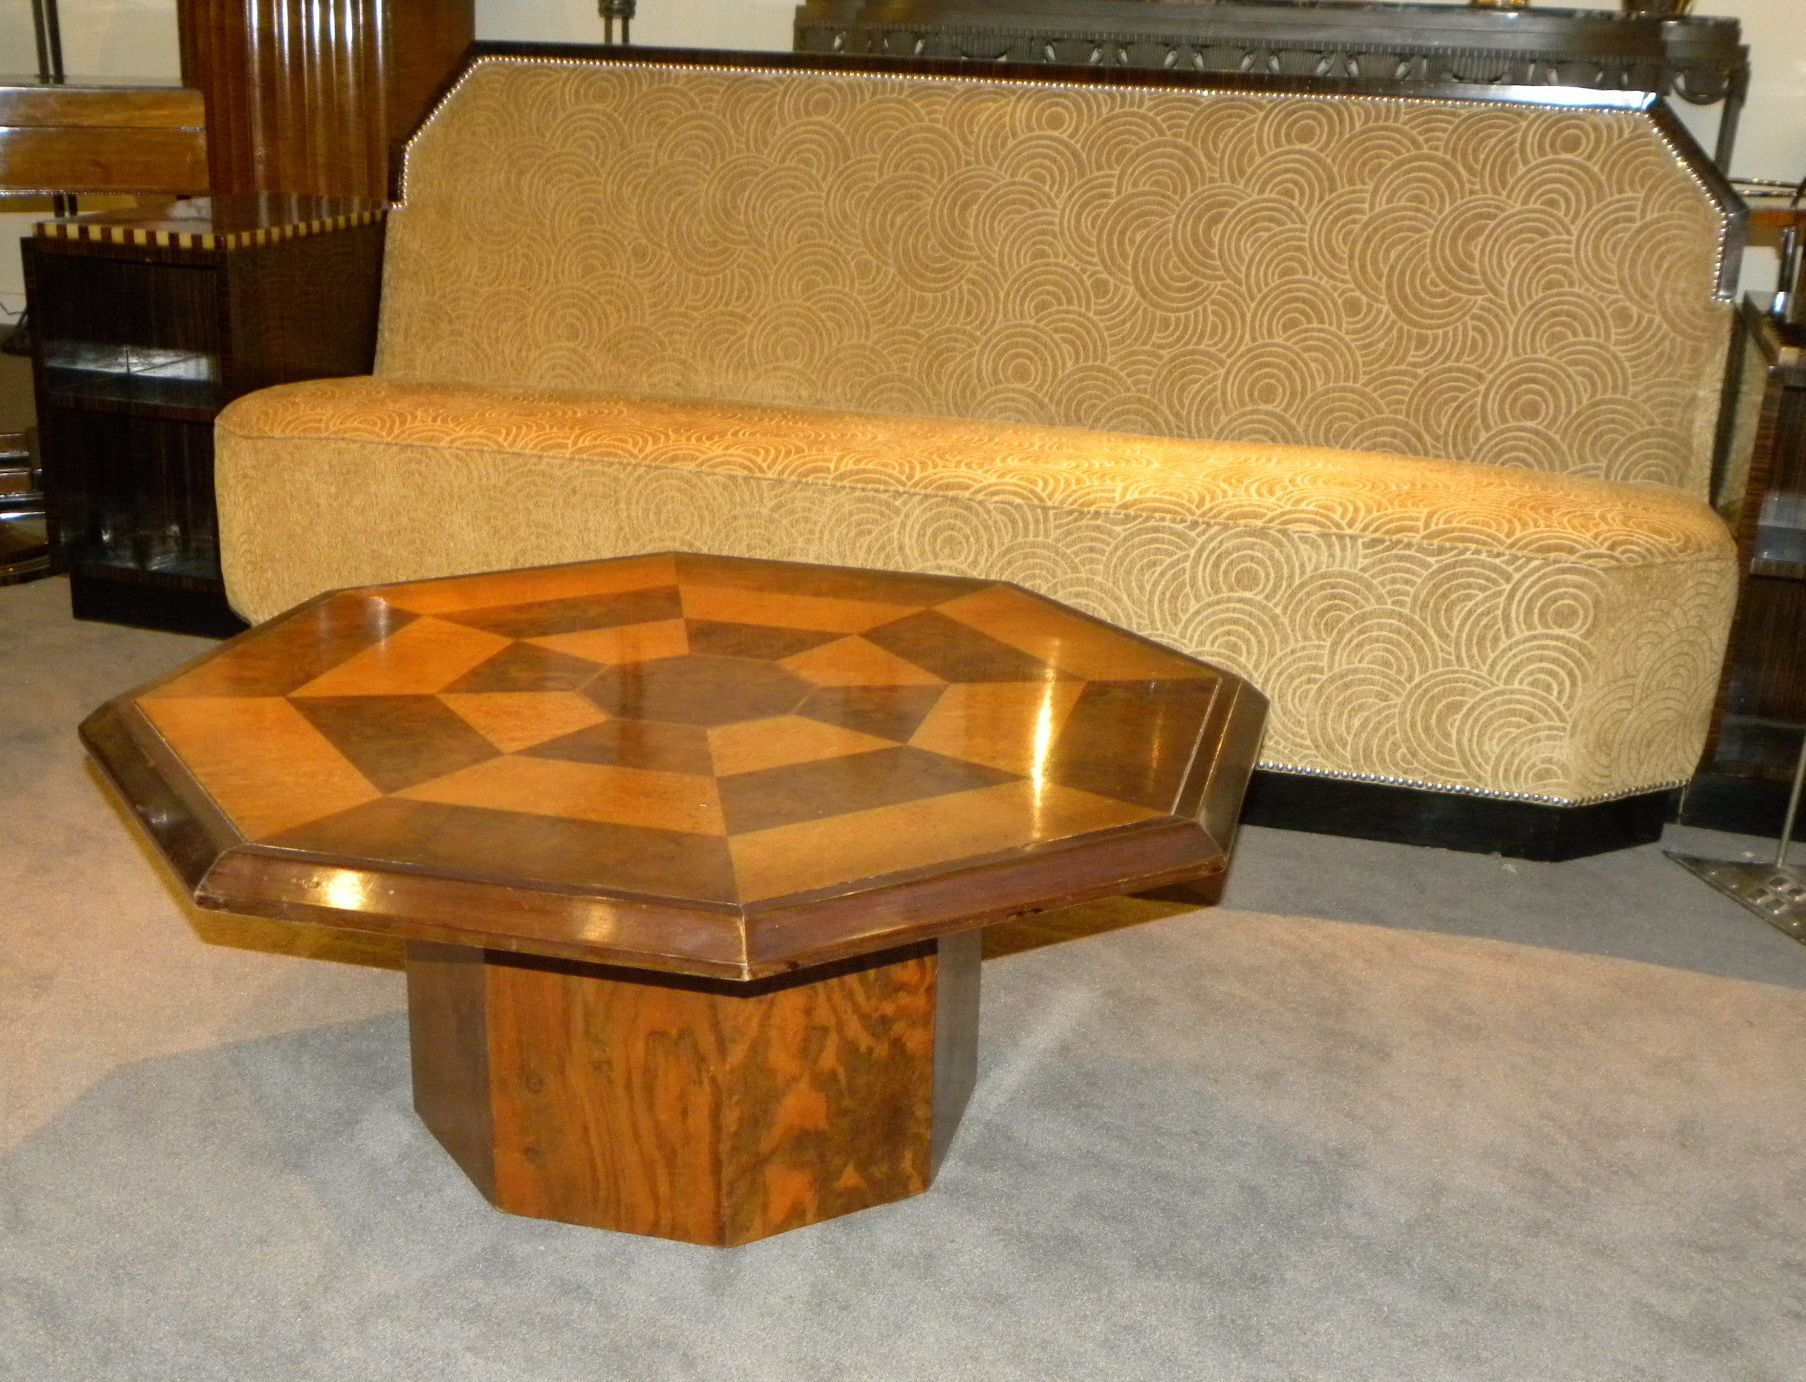 Original Two Tone Octagon Coffee Table | Small Tables Throughout Octagon Console Tables (Photo 4 of 20)